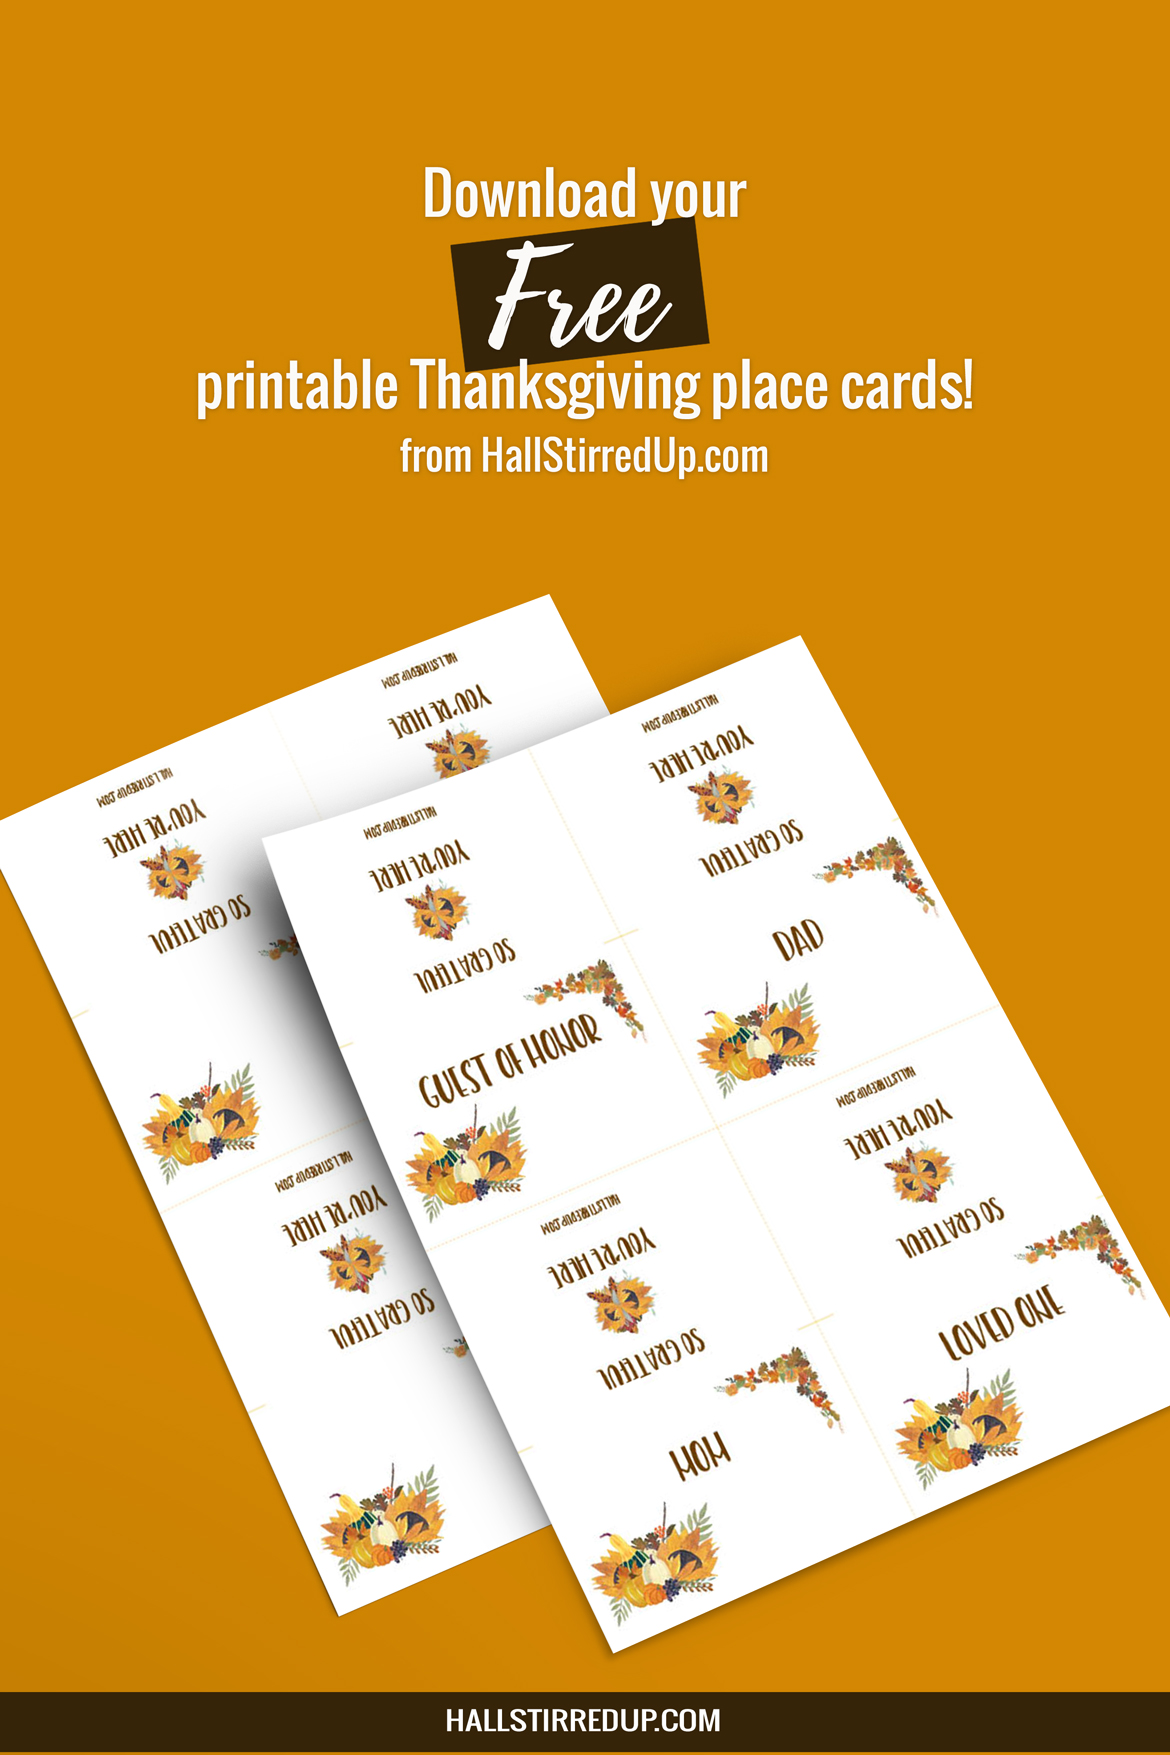 Download your fun and free Thanksgiving place cards